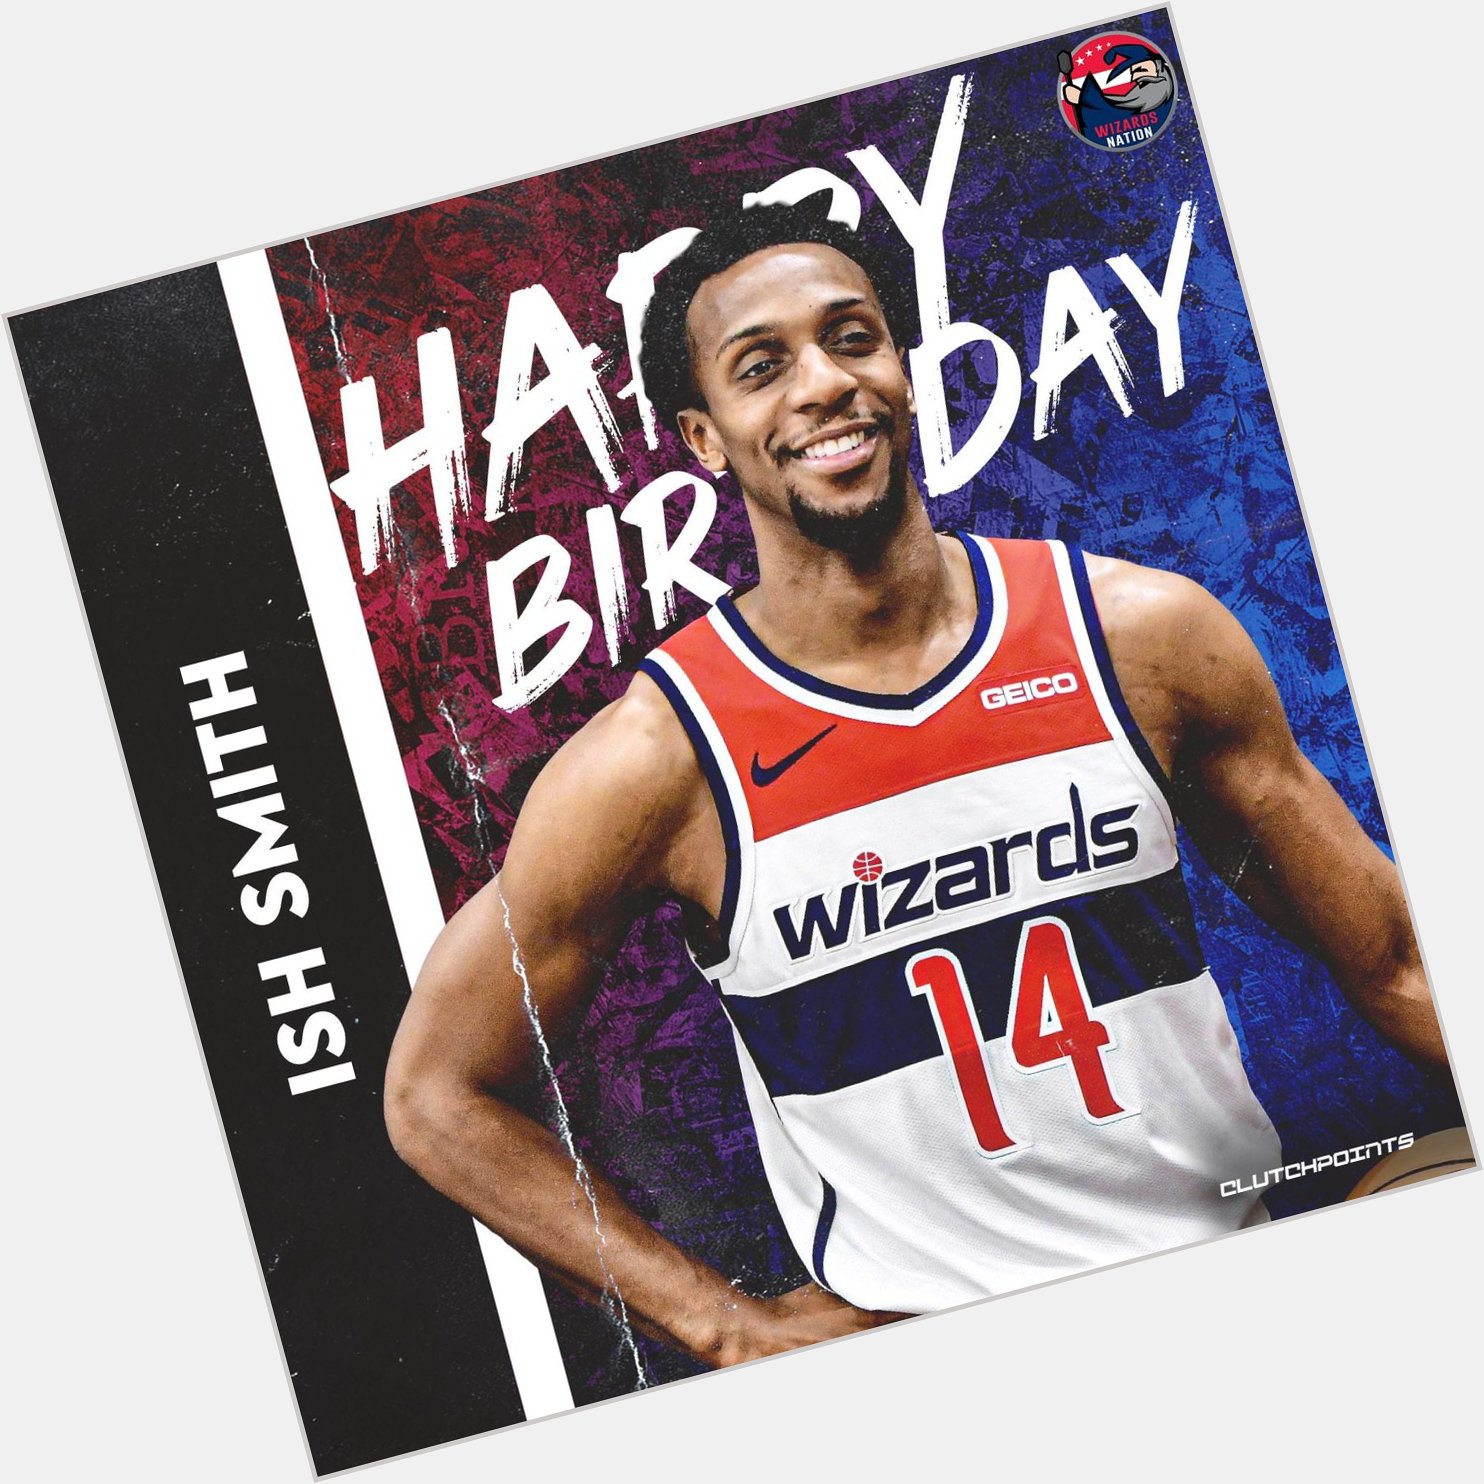 Wizards Nation, join us in wishing Ish Smith a happy birthday! 